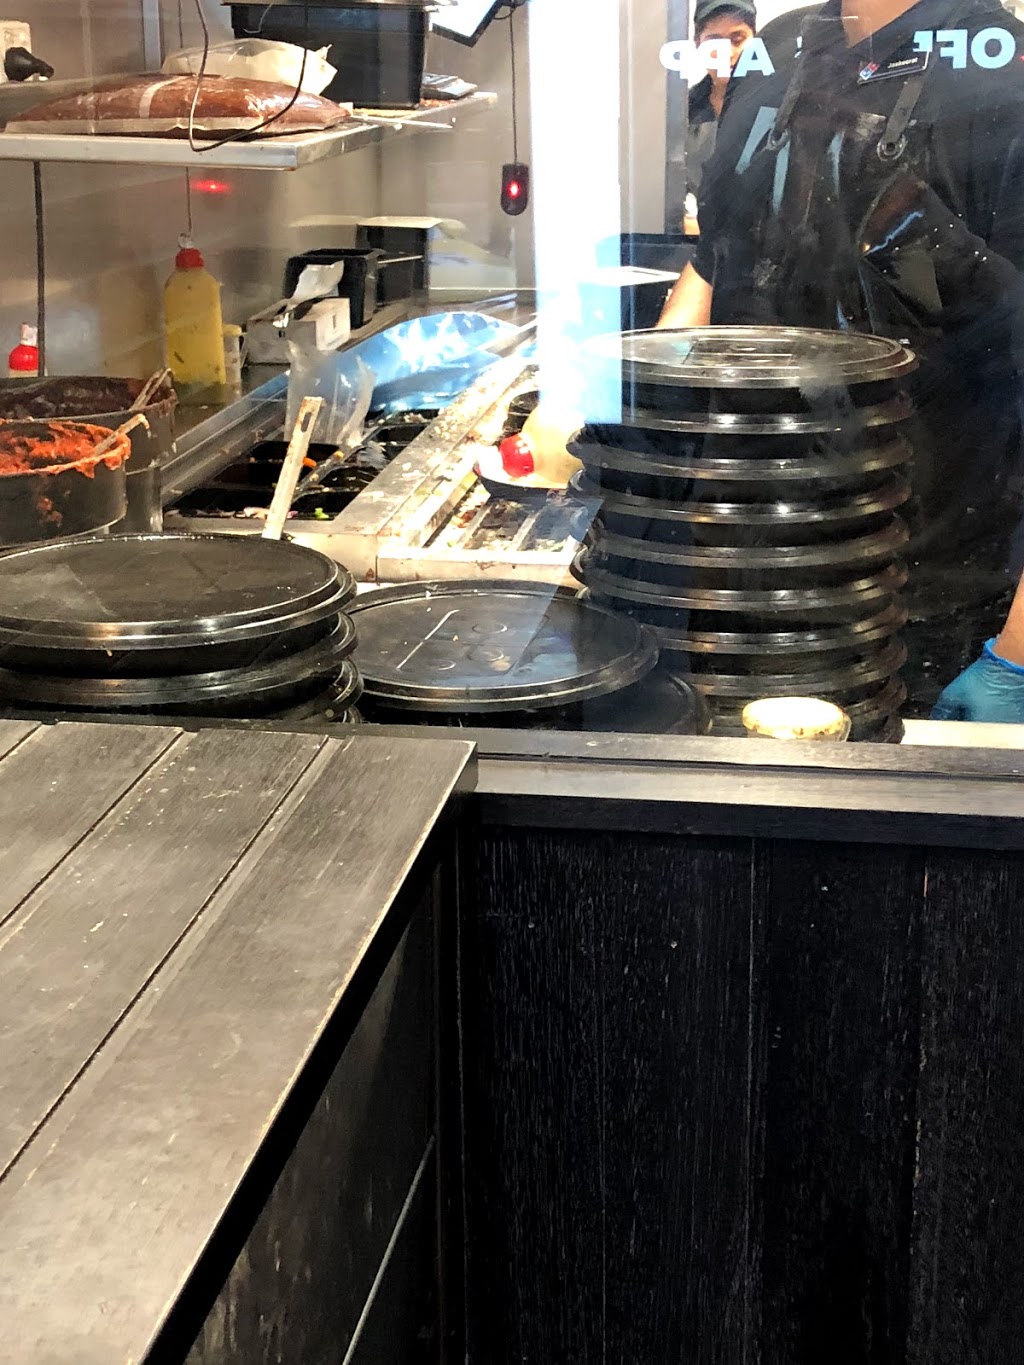 Dominos Pizza Epping North On Lyndarum Drive | meal takeaway | Cnr Epping Road, Lyndarum Dr, Epping VIC 3076, Australia | 0392198020 OR +61 3 9219 8020